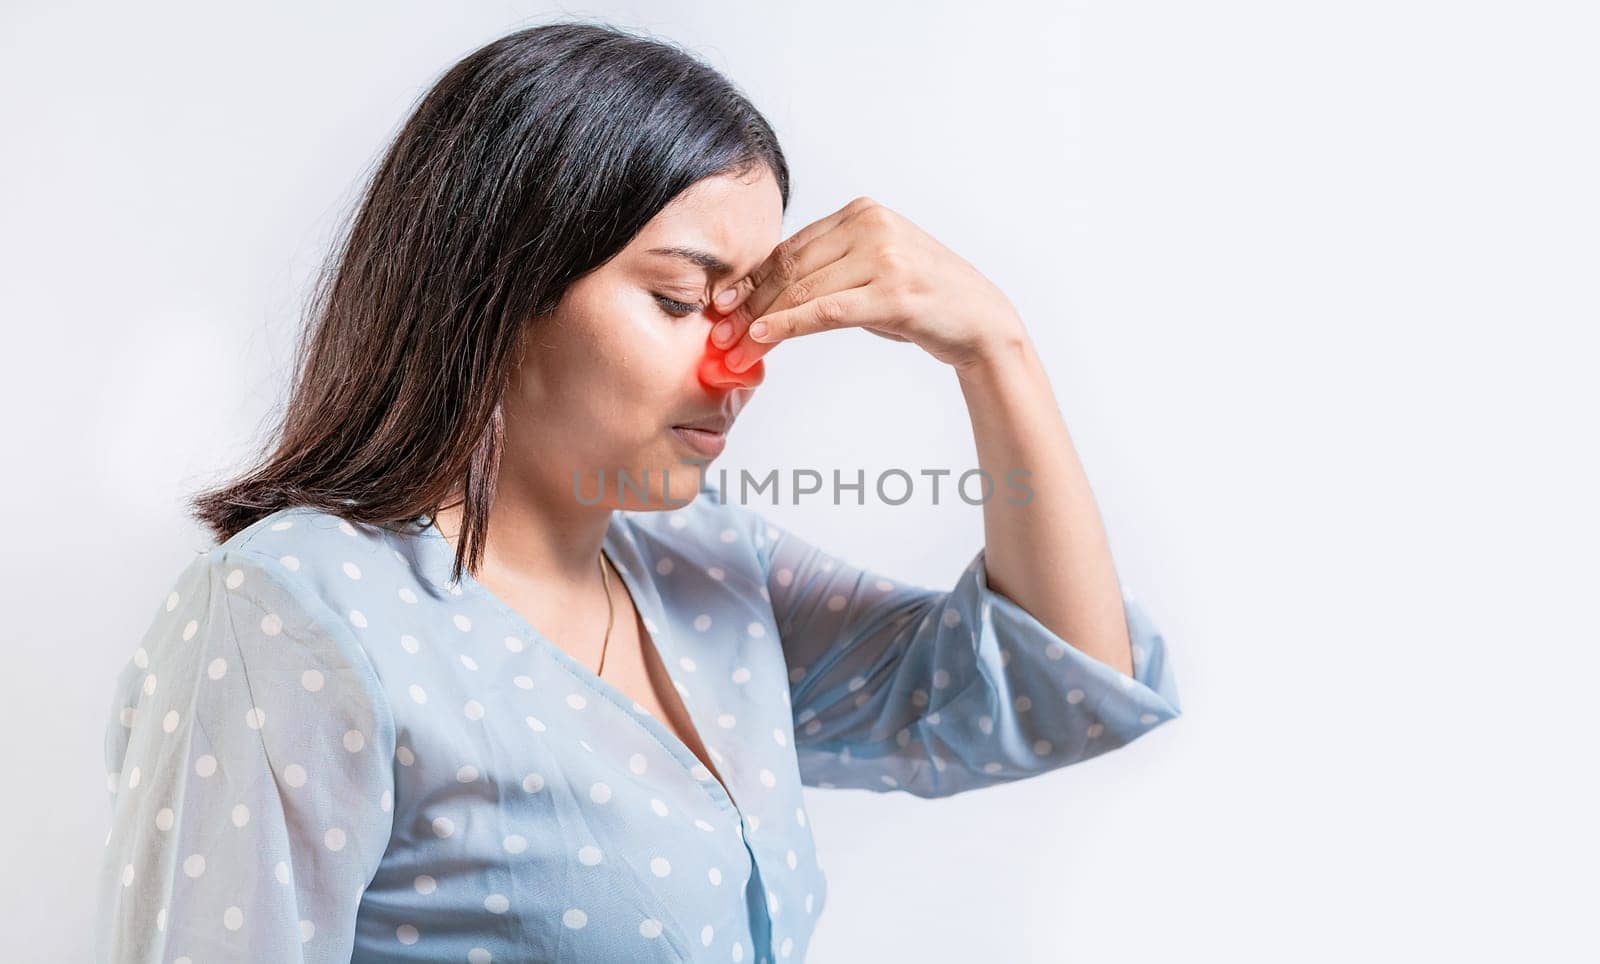 Young woman with pain touching nose. Person with nasal bridge pain, Girl with nasal bridge headache. Sinus pain concept by isaiphoto